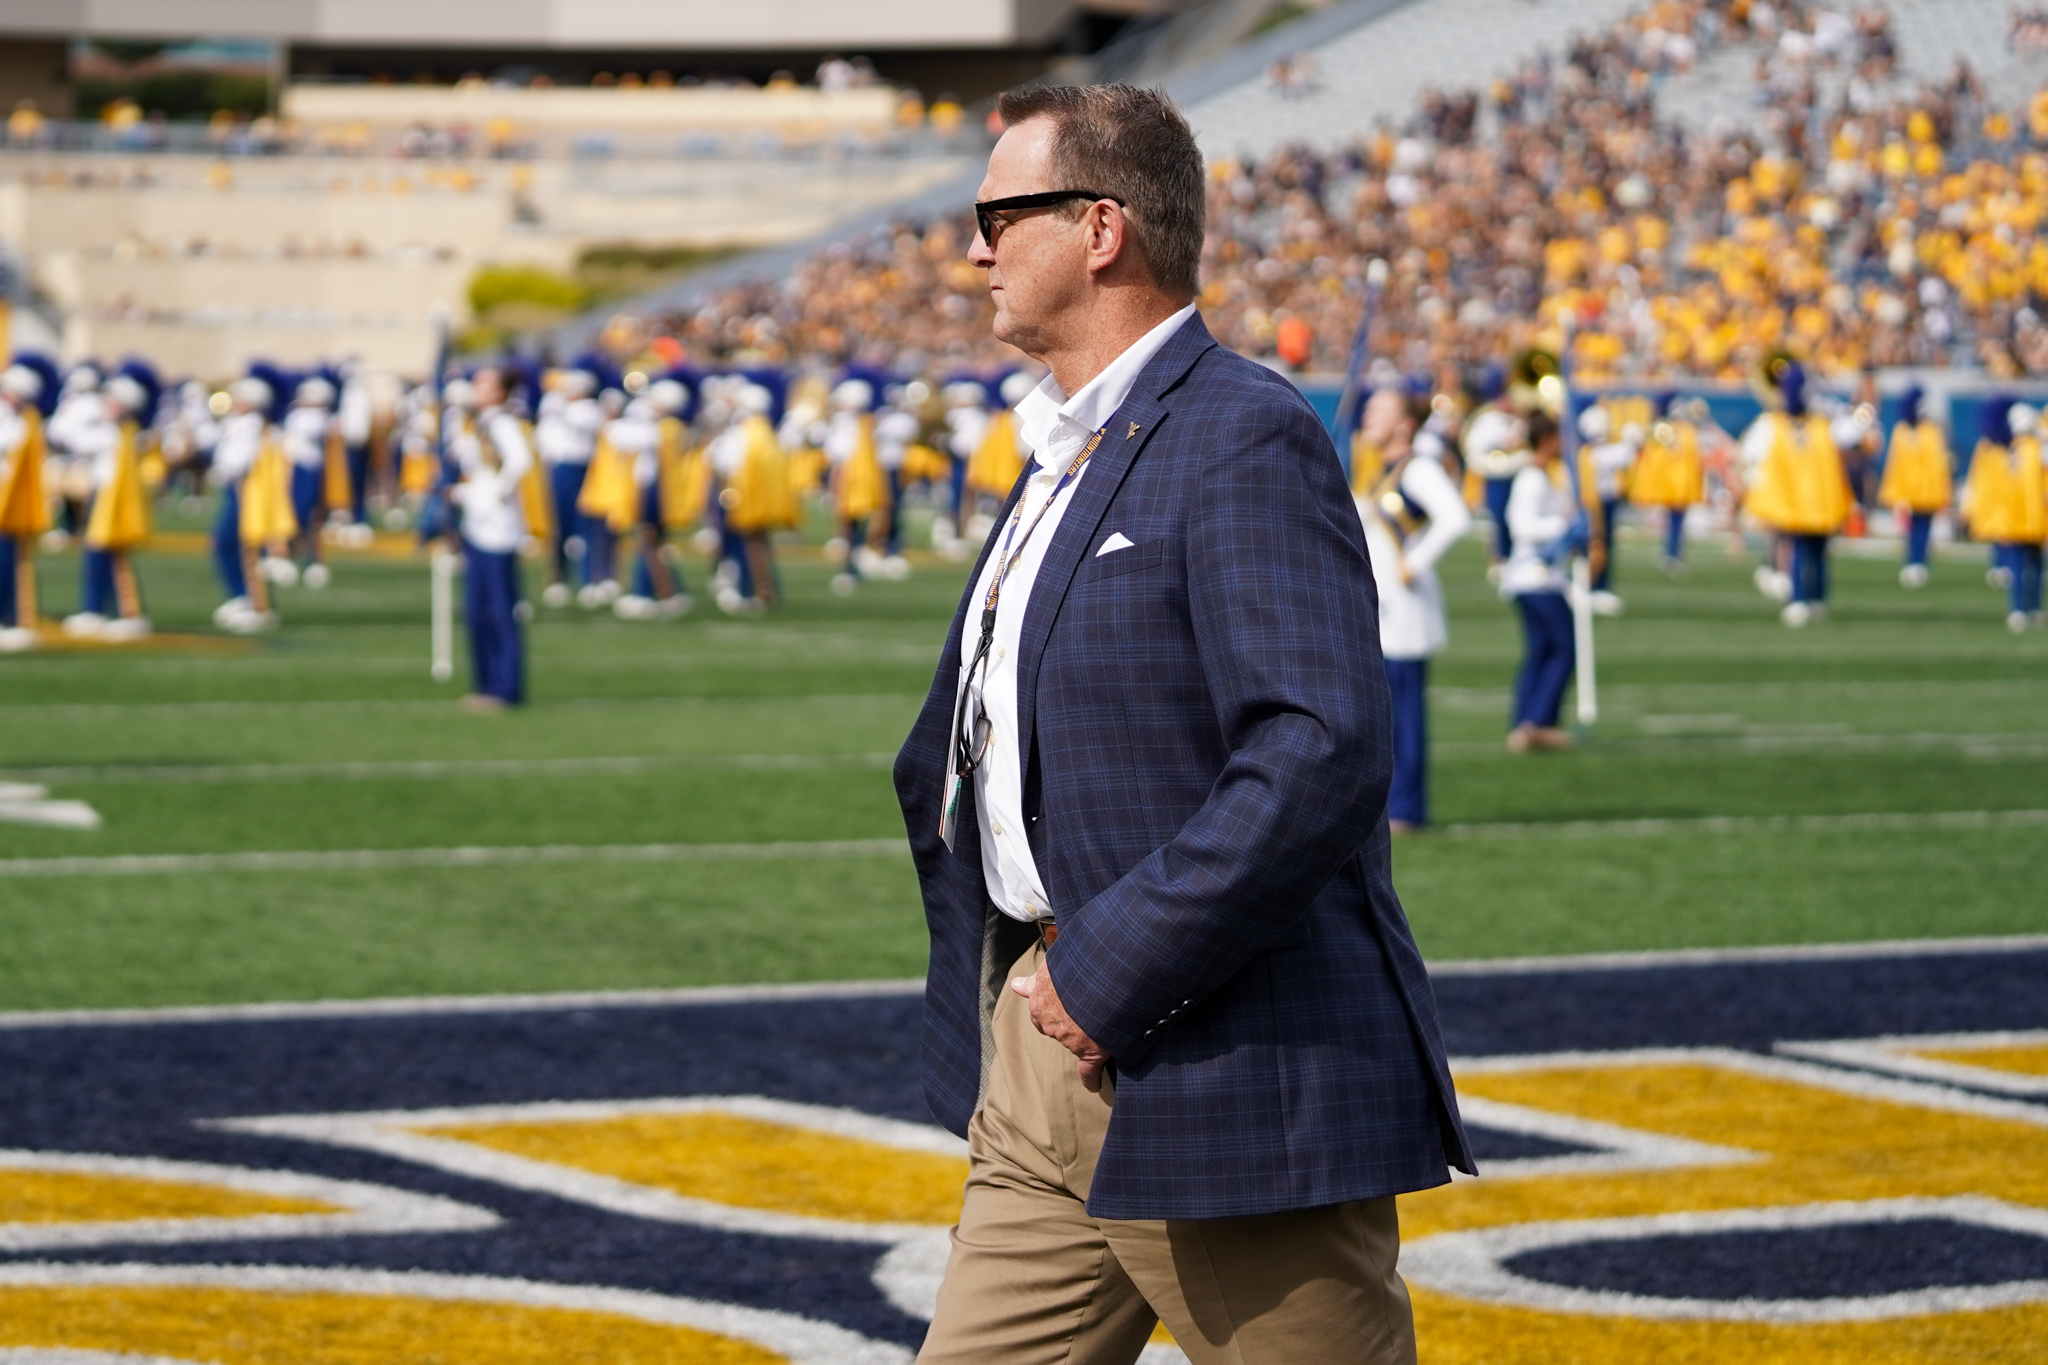 WVU begins national search for athletic director as Lyons departs